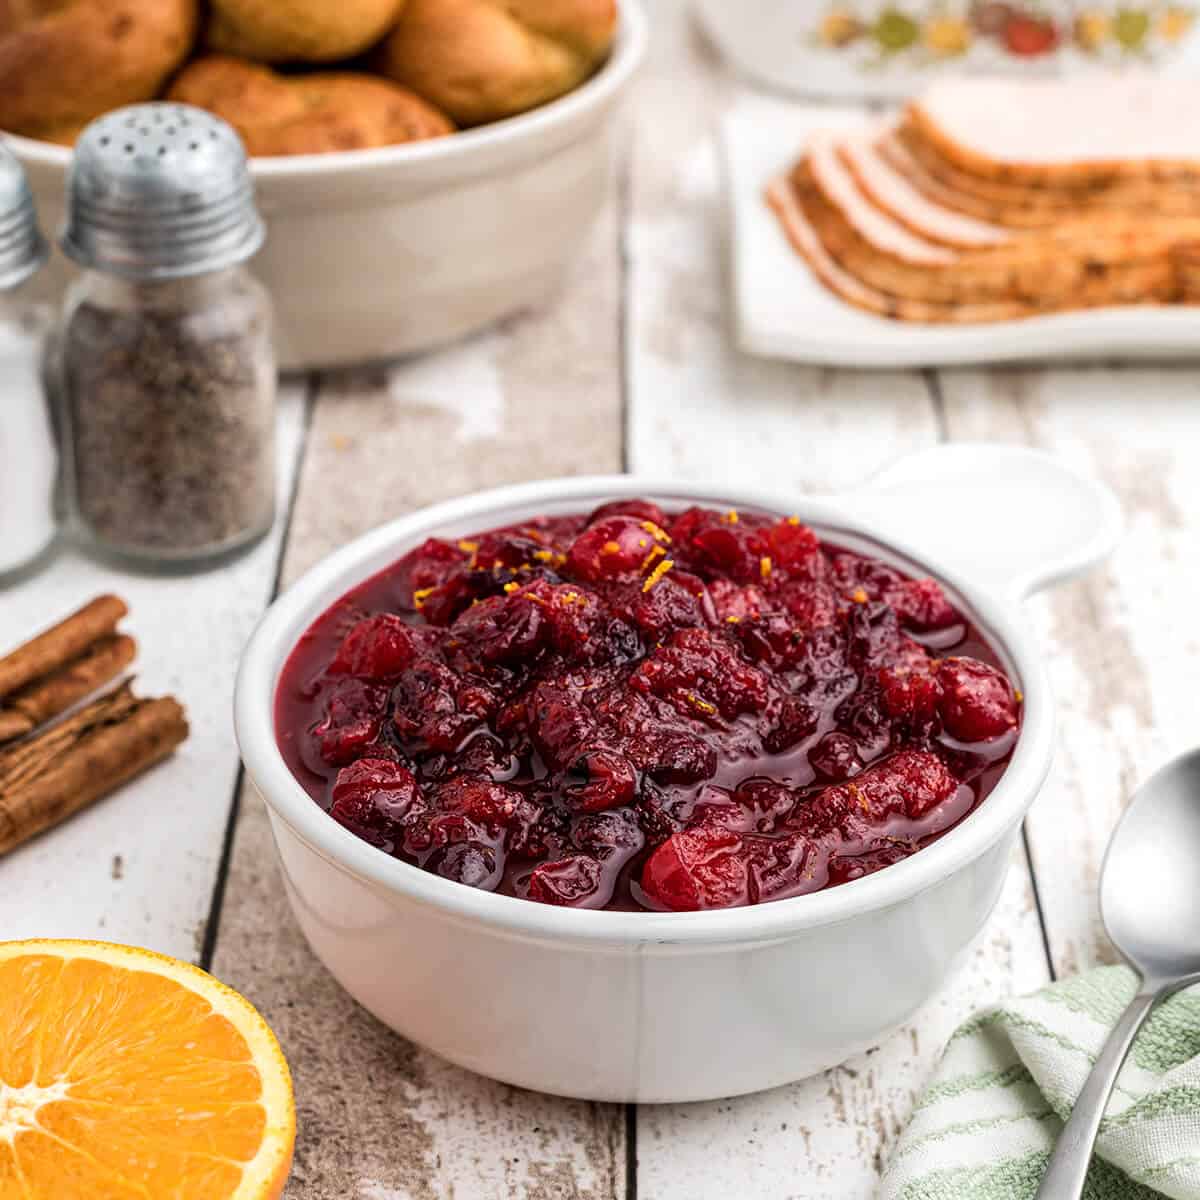 Cranberry orange sauce in a white serving dish.